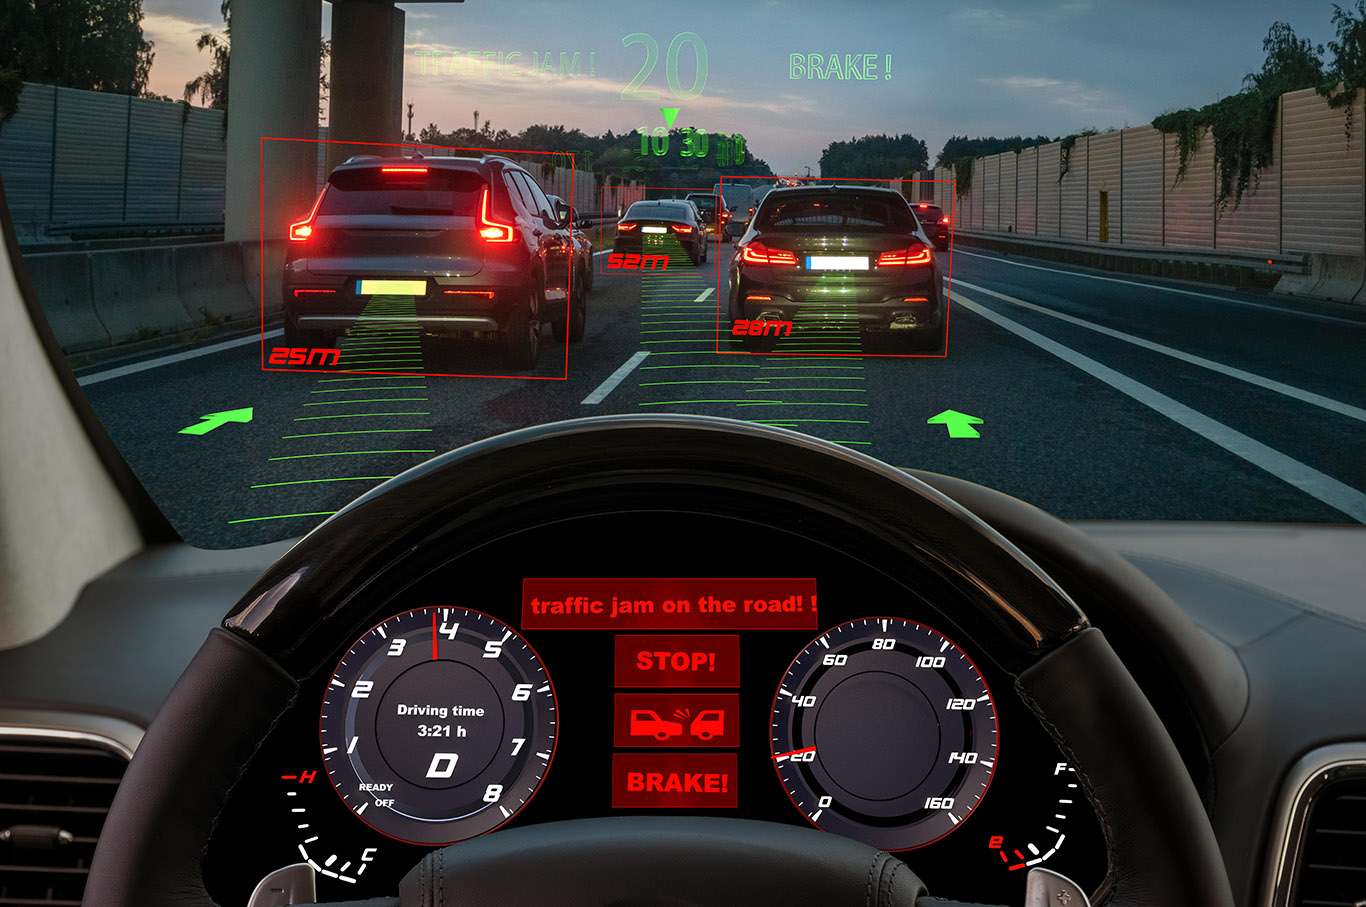 Car technology preventing accidents